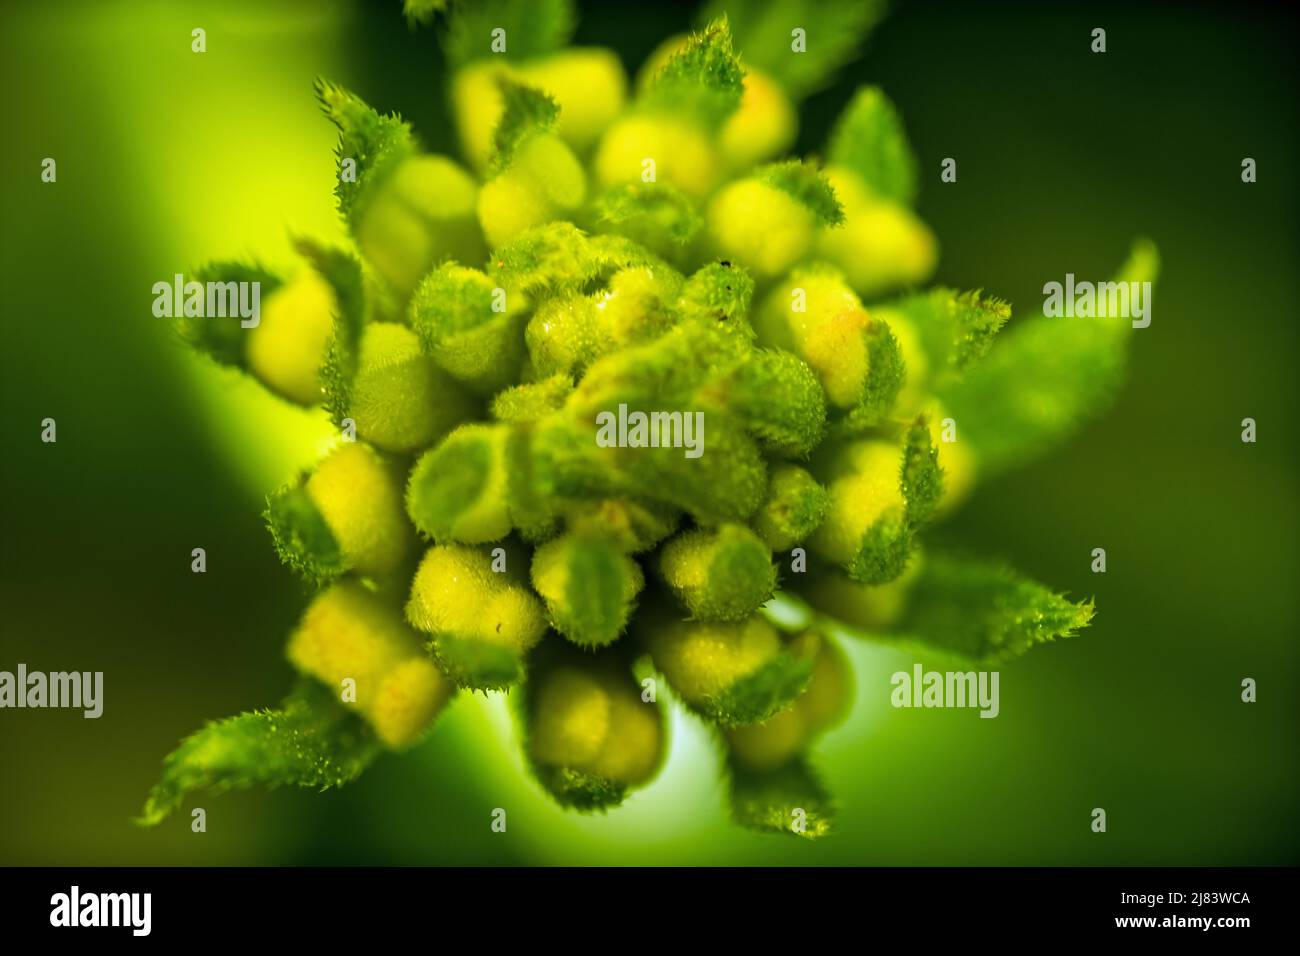 Macro view of the stem of a green colored flower Stock Photo